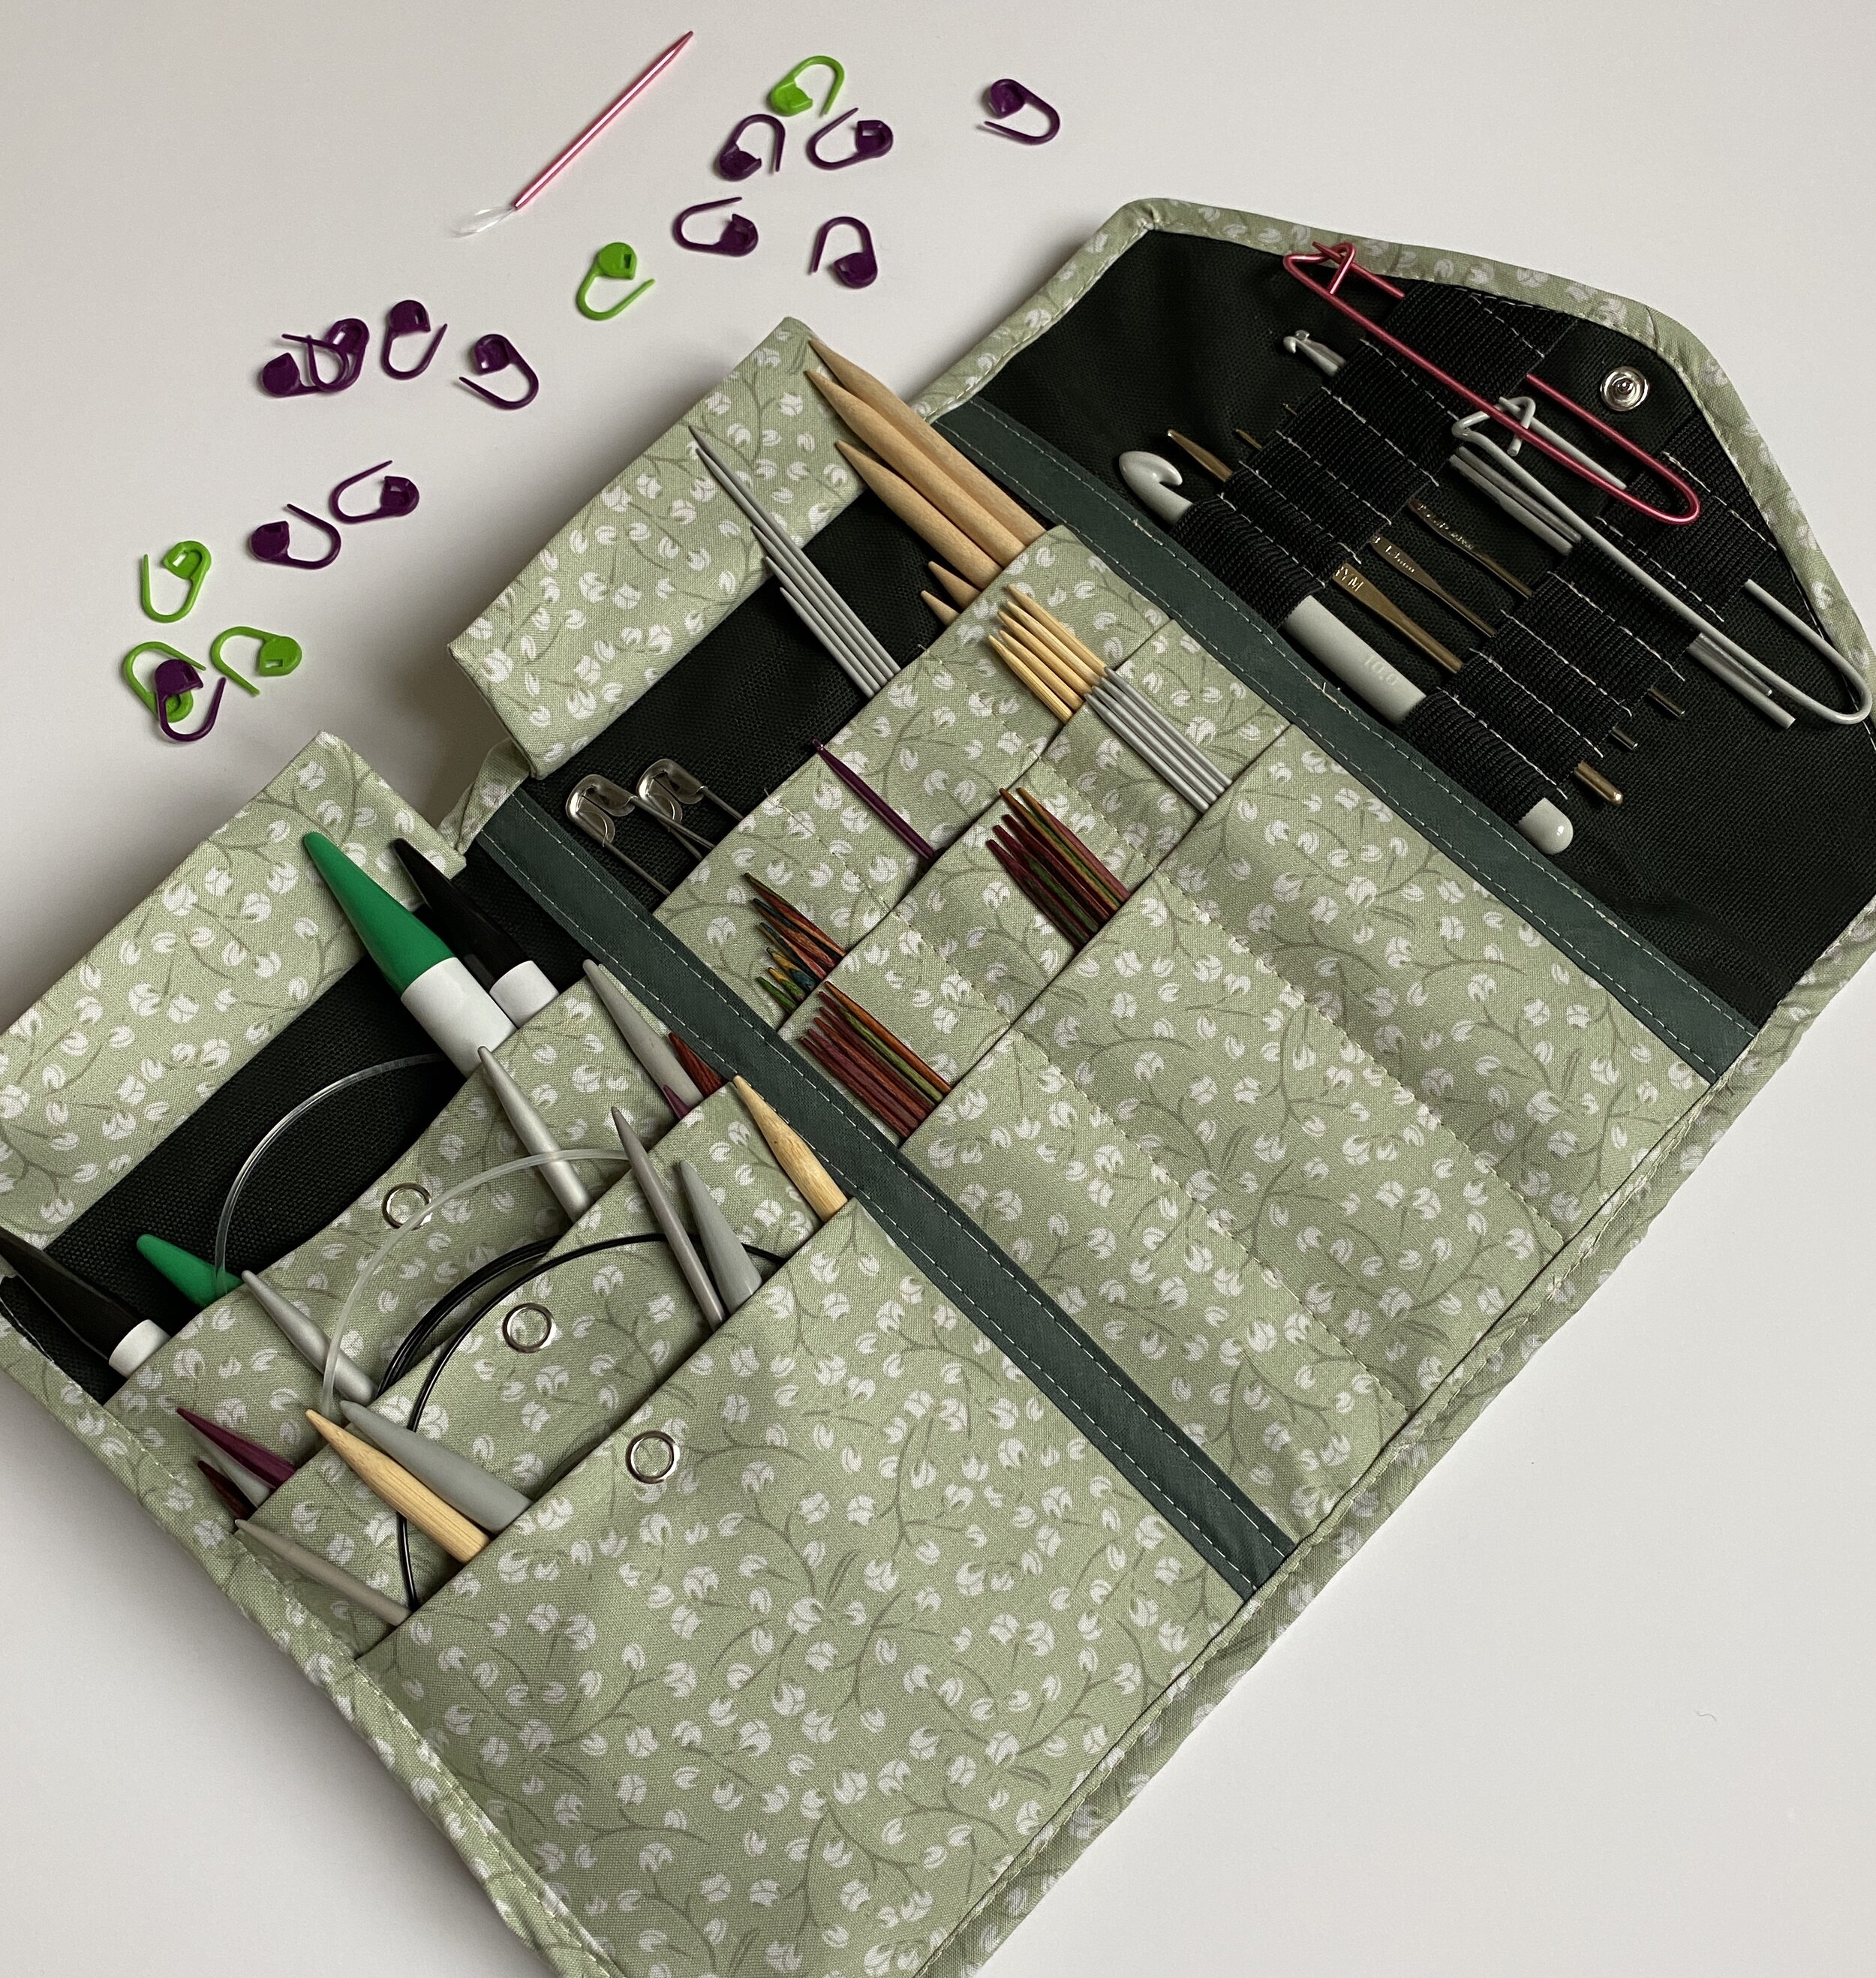 Making the Knitting Needle Case, version 2022, video tutorial